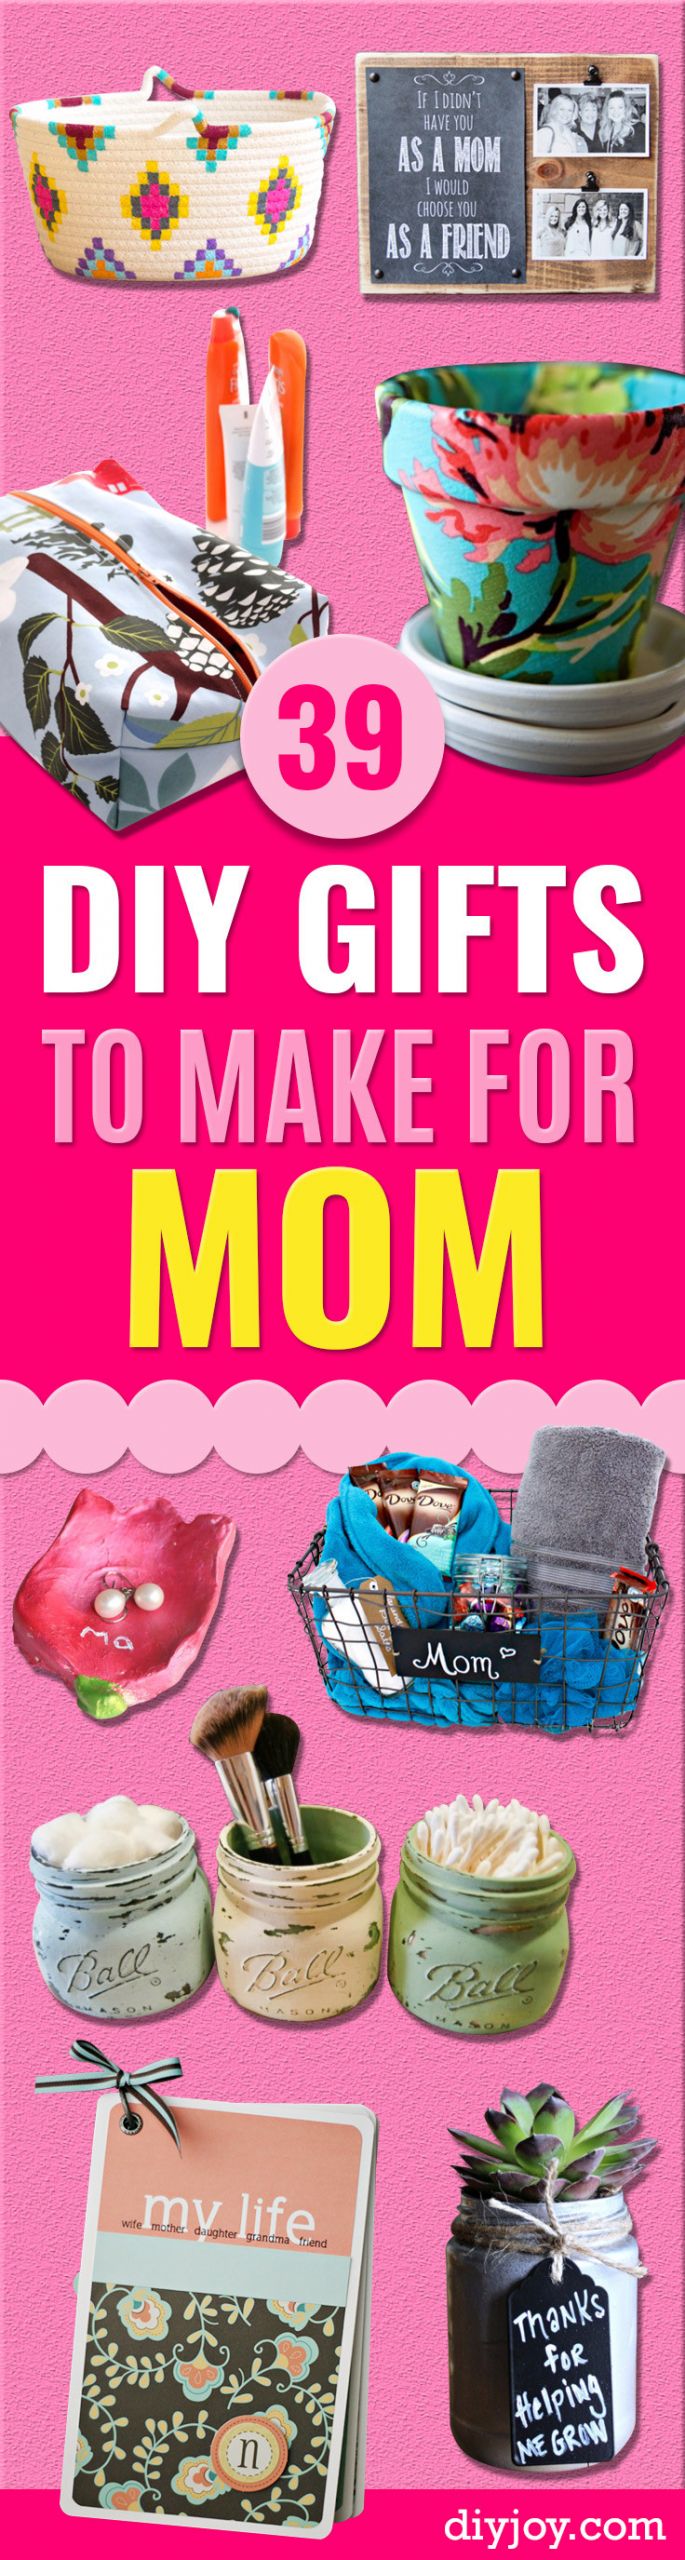 Diy Birthday Gift Ideas For Mom
 39 Creative DIY Gifts to Make for Mom